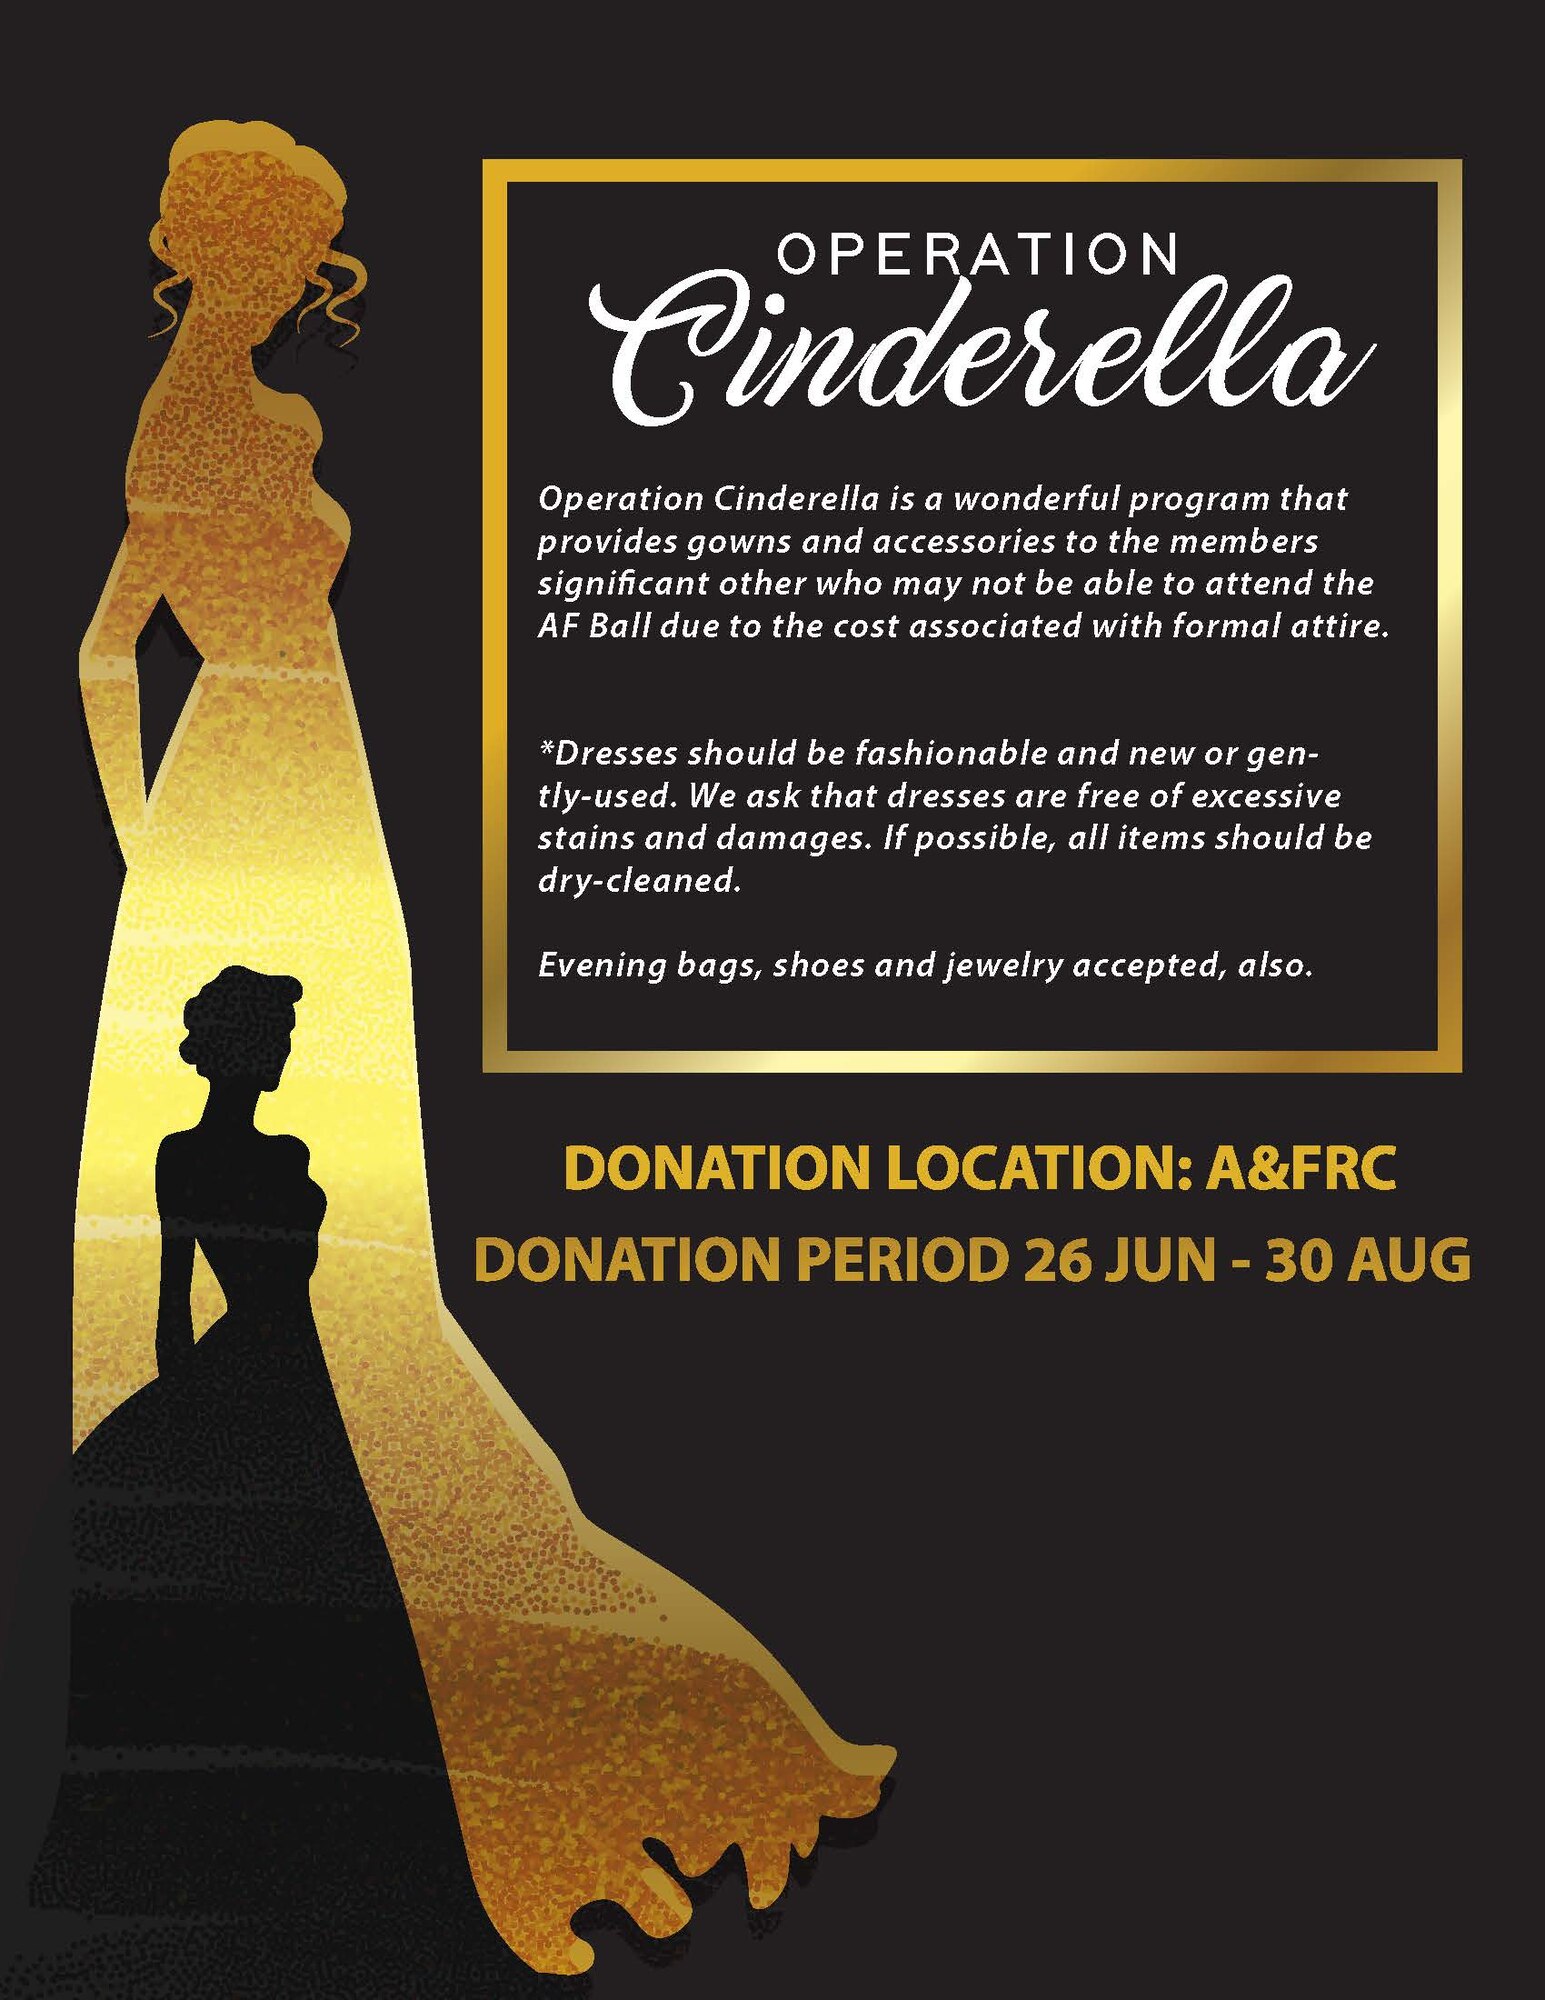 Moody’s annual Operational Cinderella, a donation drive for formal women’s attire, is in full swing and is slated to run until Sept. 16. Operation Cinderella is a nation-wide donation drive that was adopted by Moody Air Force Base in order to gain maximum participation for the upcoming Air Force Ball by providing free formal women’s attire to those who wish to attend. (U.S. Air Force courtesy photo)